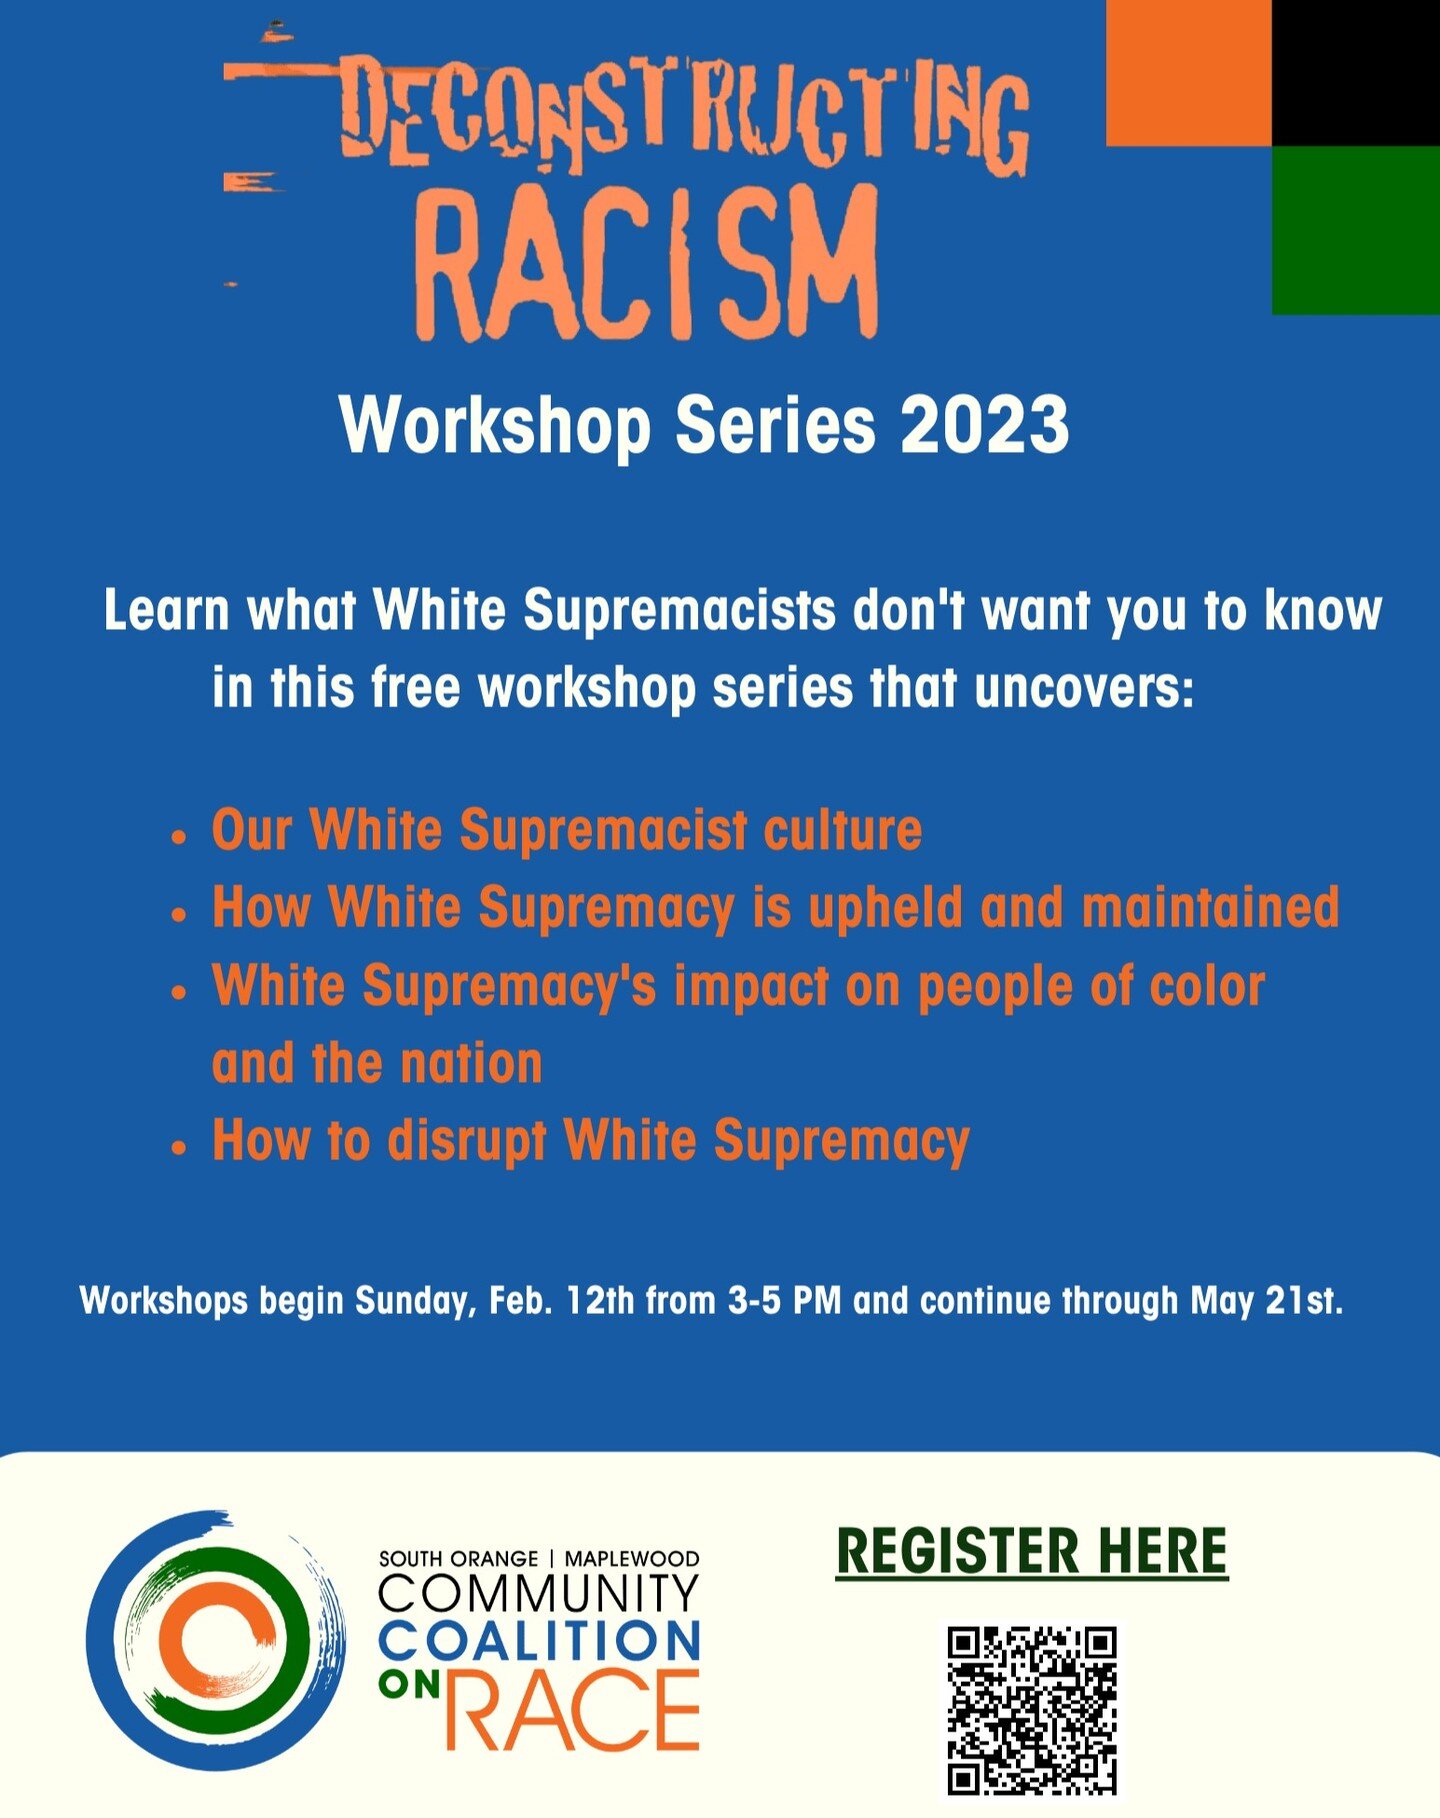 In Seton Village, we continue to honor &amp; celebrate Black History Month. Please consider attending this informative &amp; educational workshop on &quot;Deconstructing Racism&quot;! #southorange #soma #mapso #blackhistorymonth #blackhistory #blackg